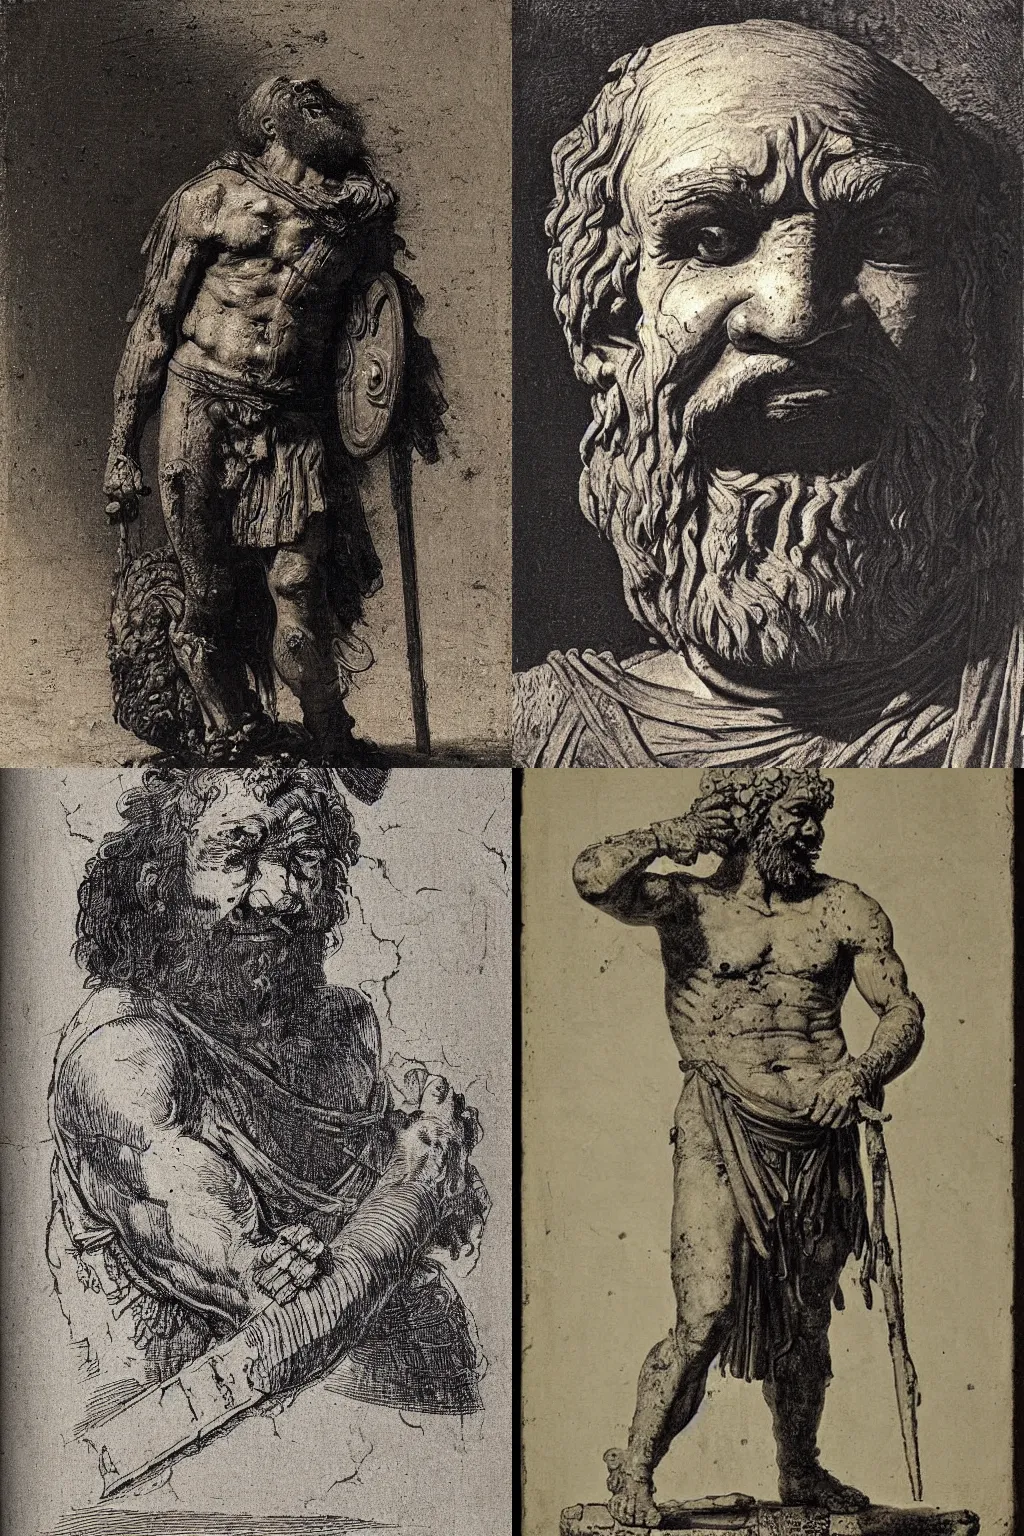 Prompt: laughing greek hoplite with many scars. Thick black beard. By rembrandt.